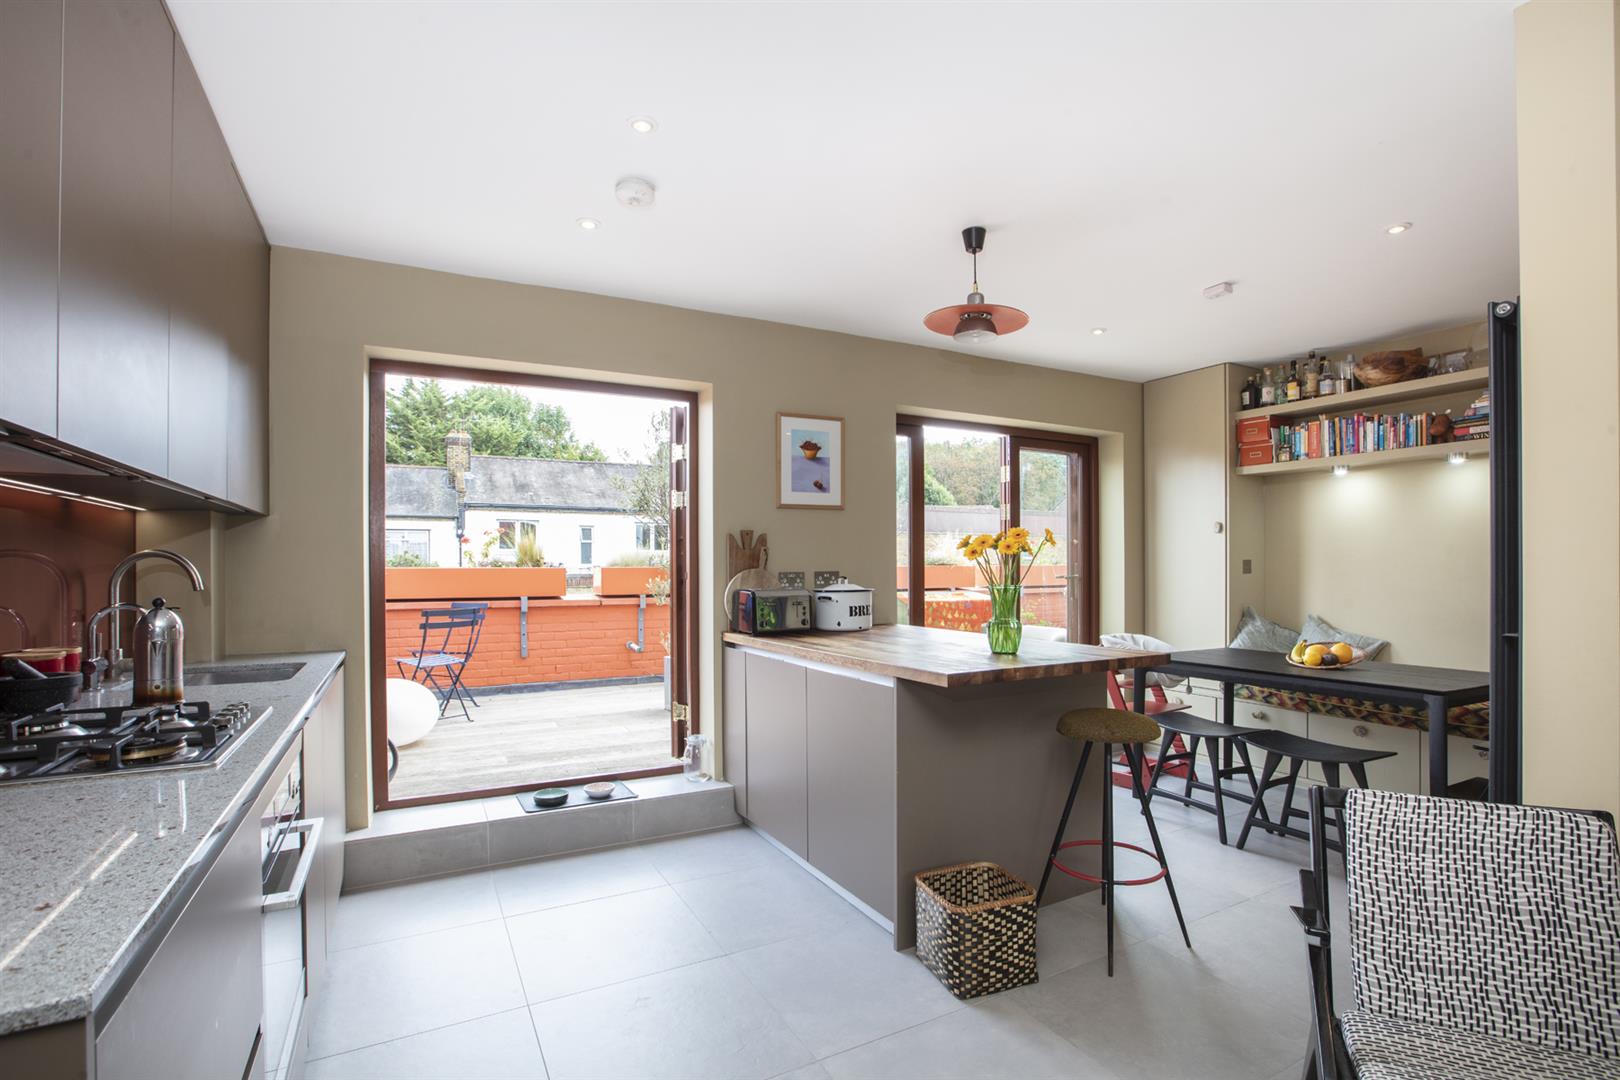 Flat - Purpose Built Sold in Gibbon Road, Nunhead, SE15 996 view6